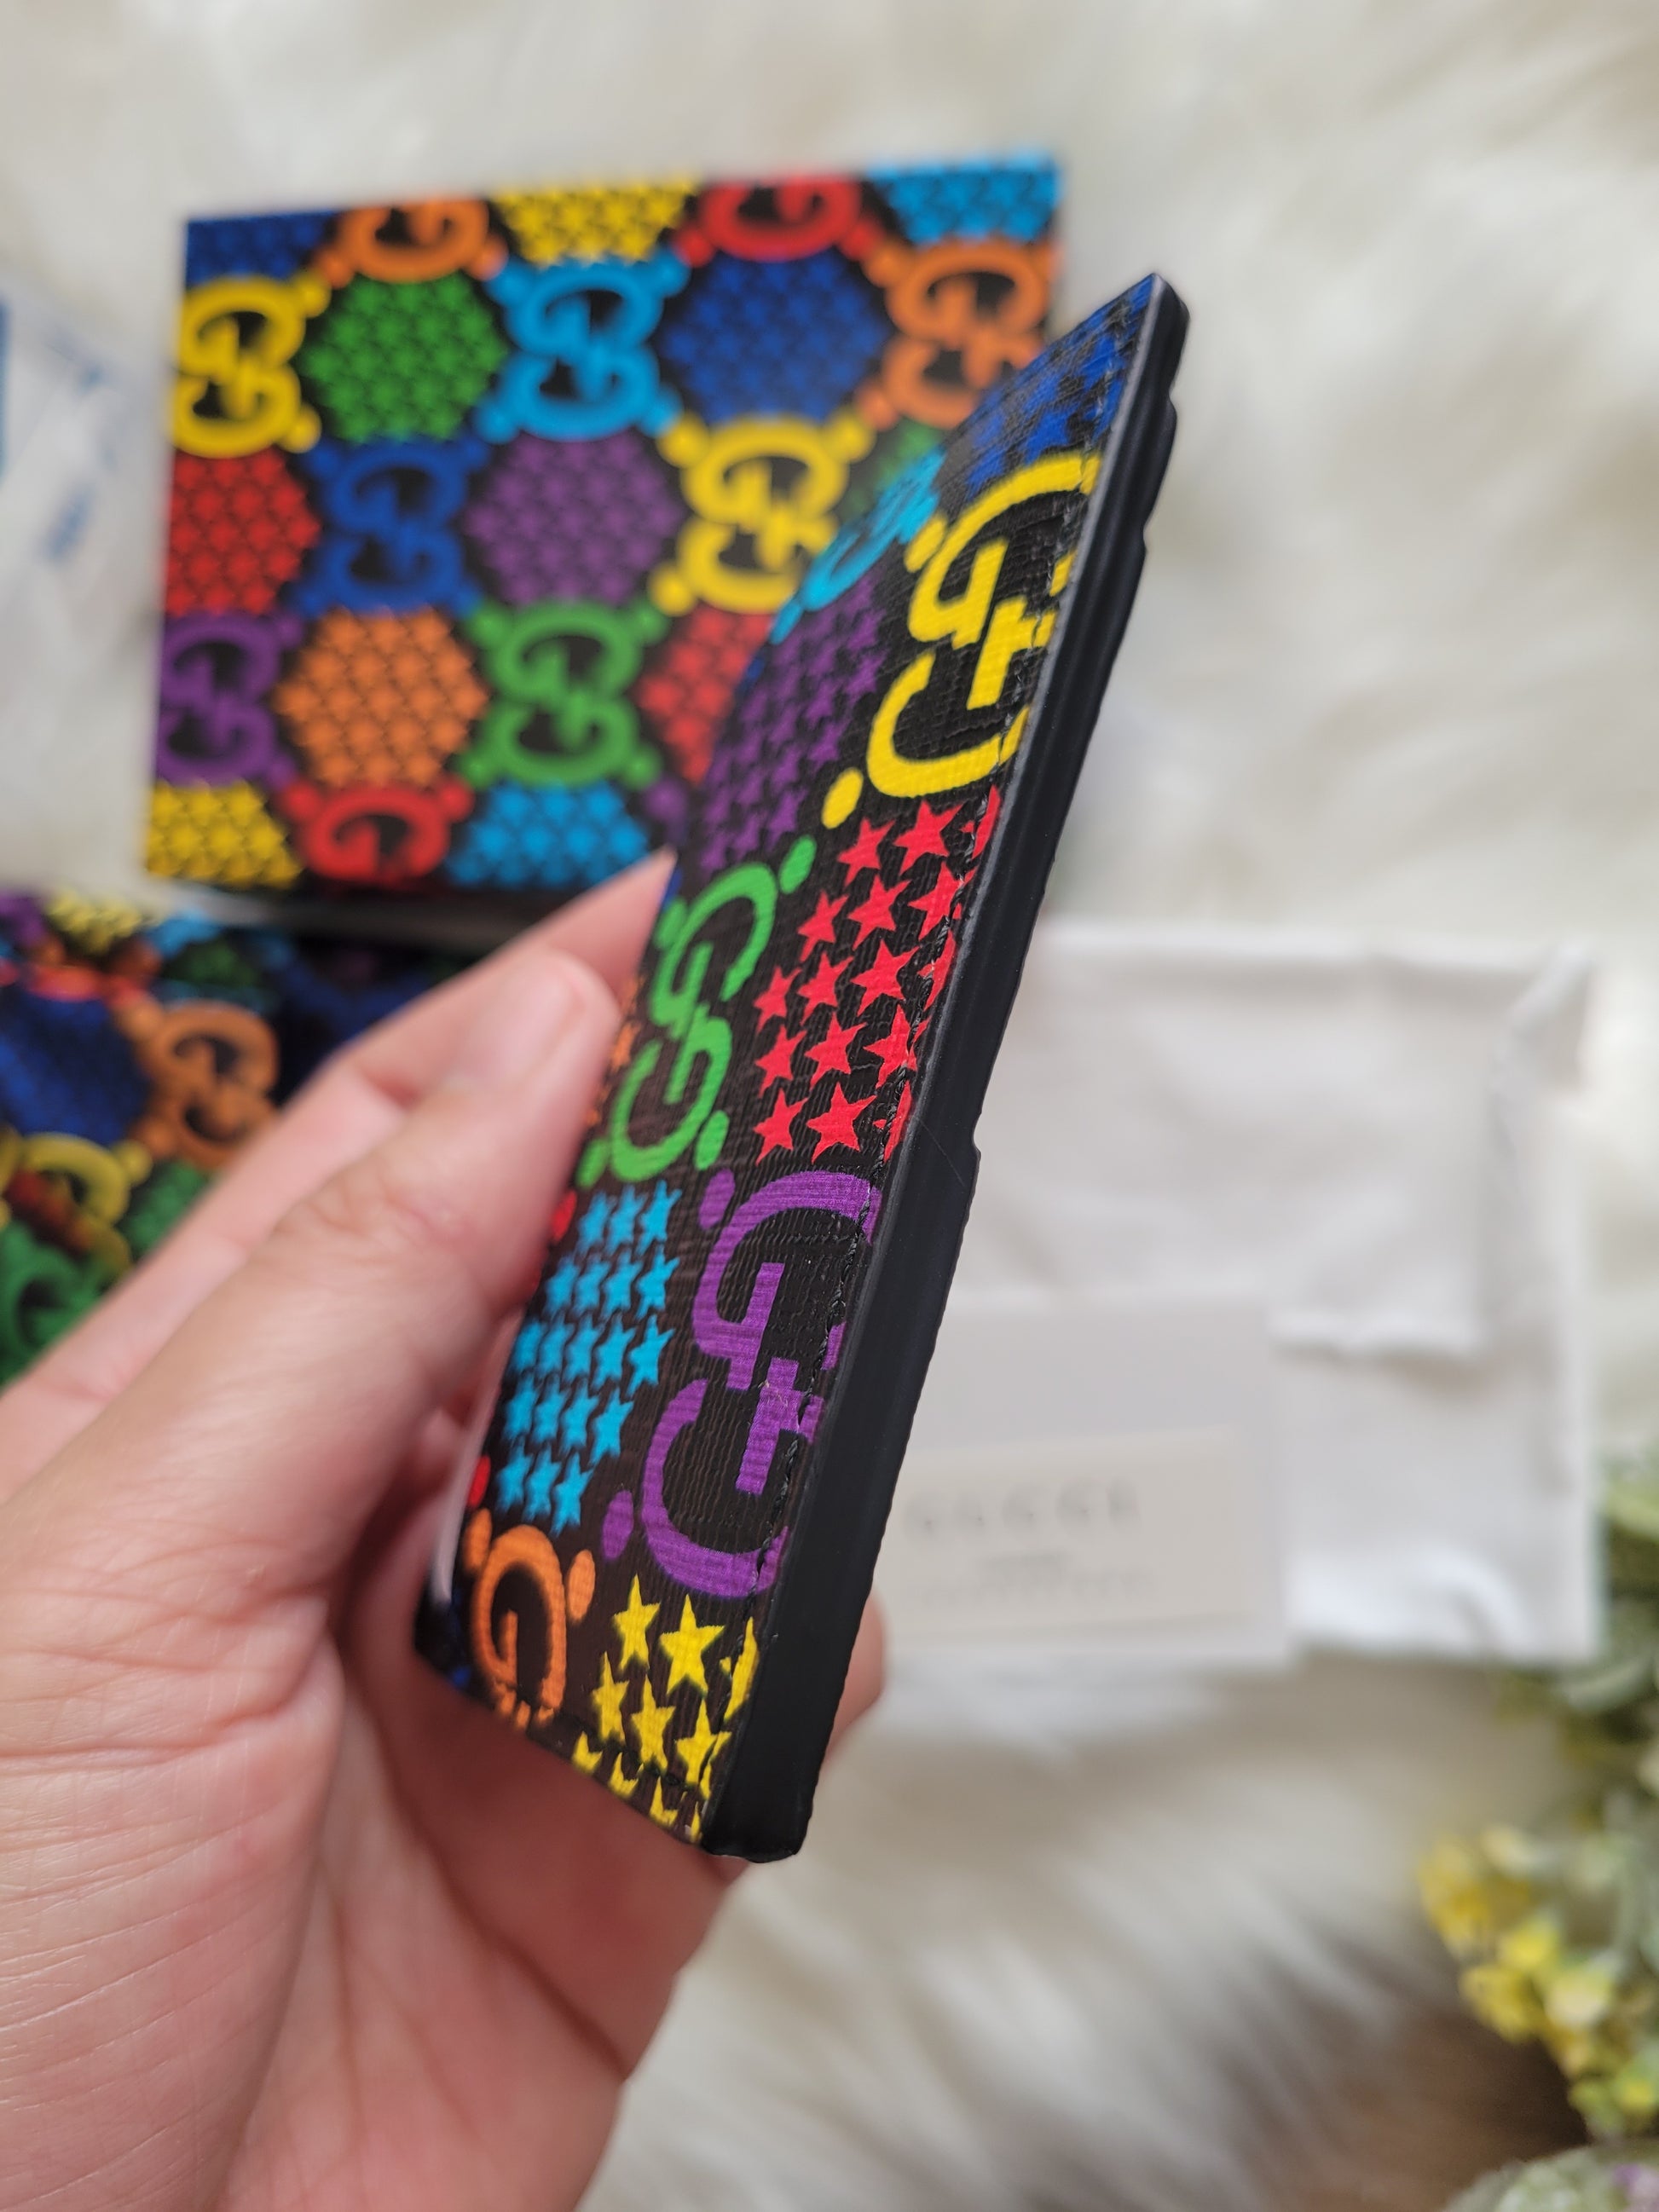 Gucci Unisex Black/Rainbow GG Supreme Psychedelic Card Holder Wallet 601098  1058